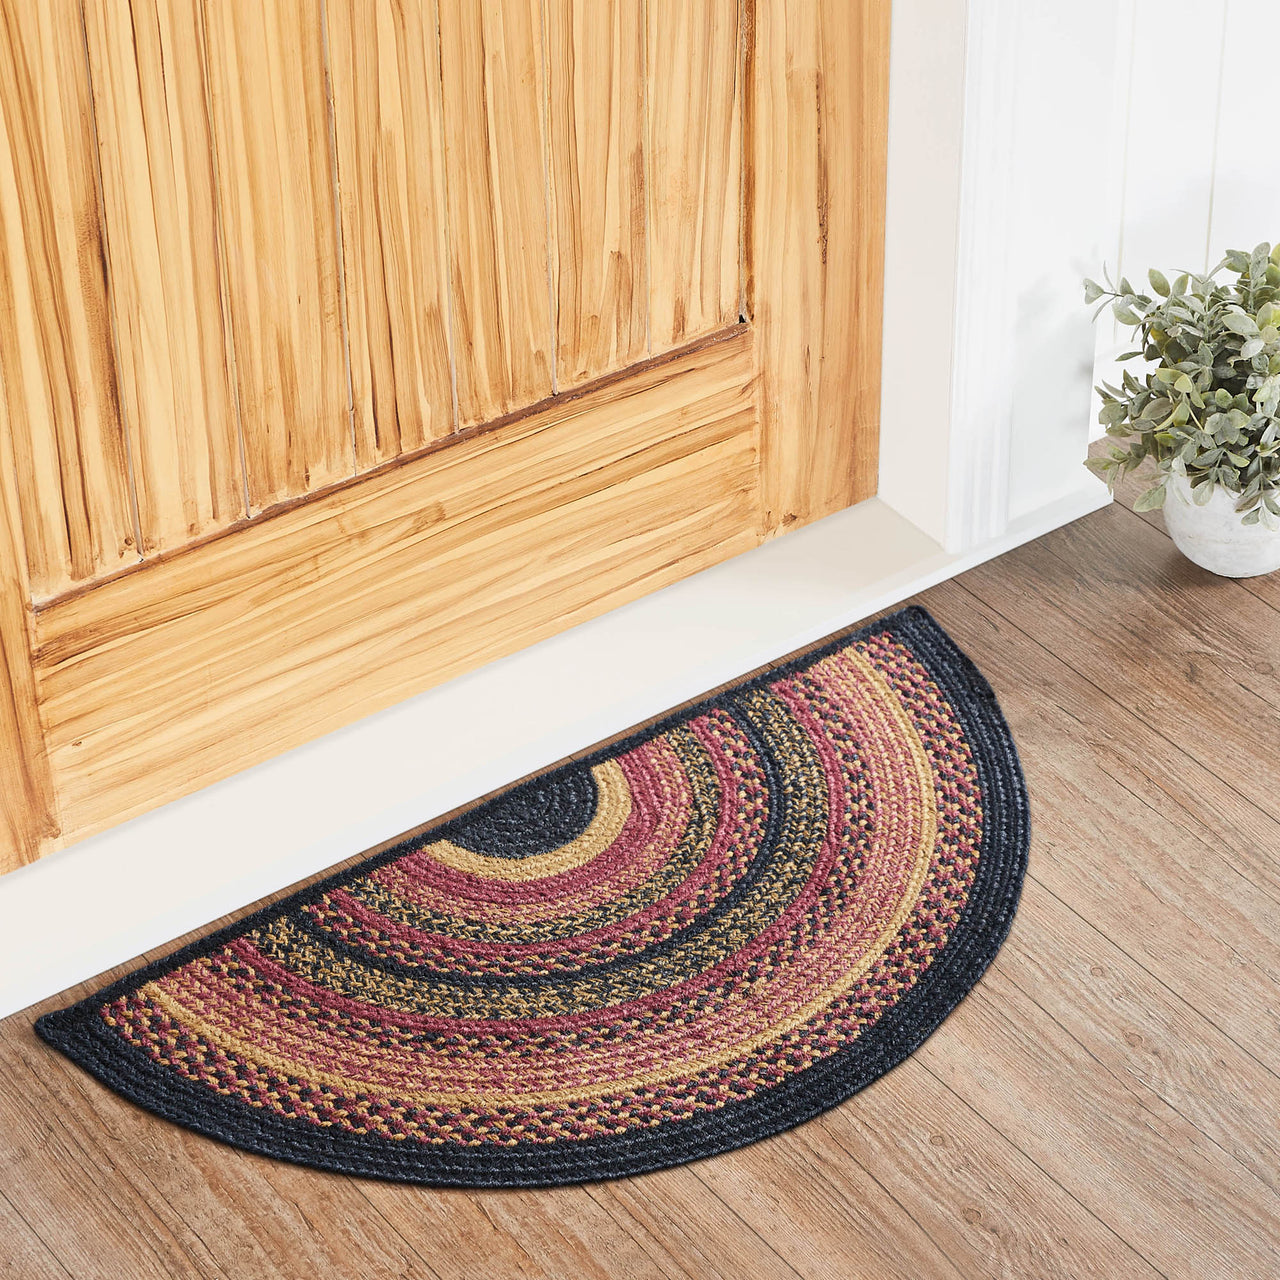 Heritage Farms Jute Braided Rug Half Circle with Rug Pad 16.5"x33" VHC Brands